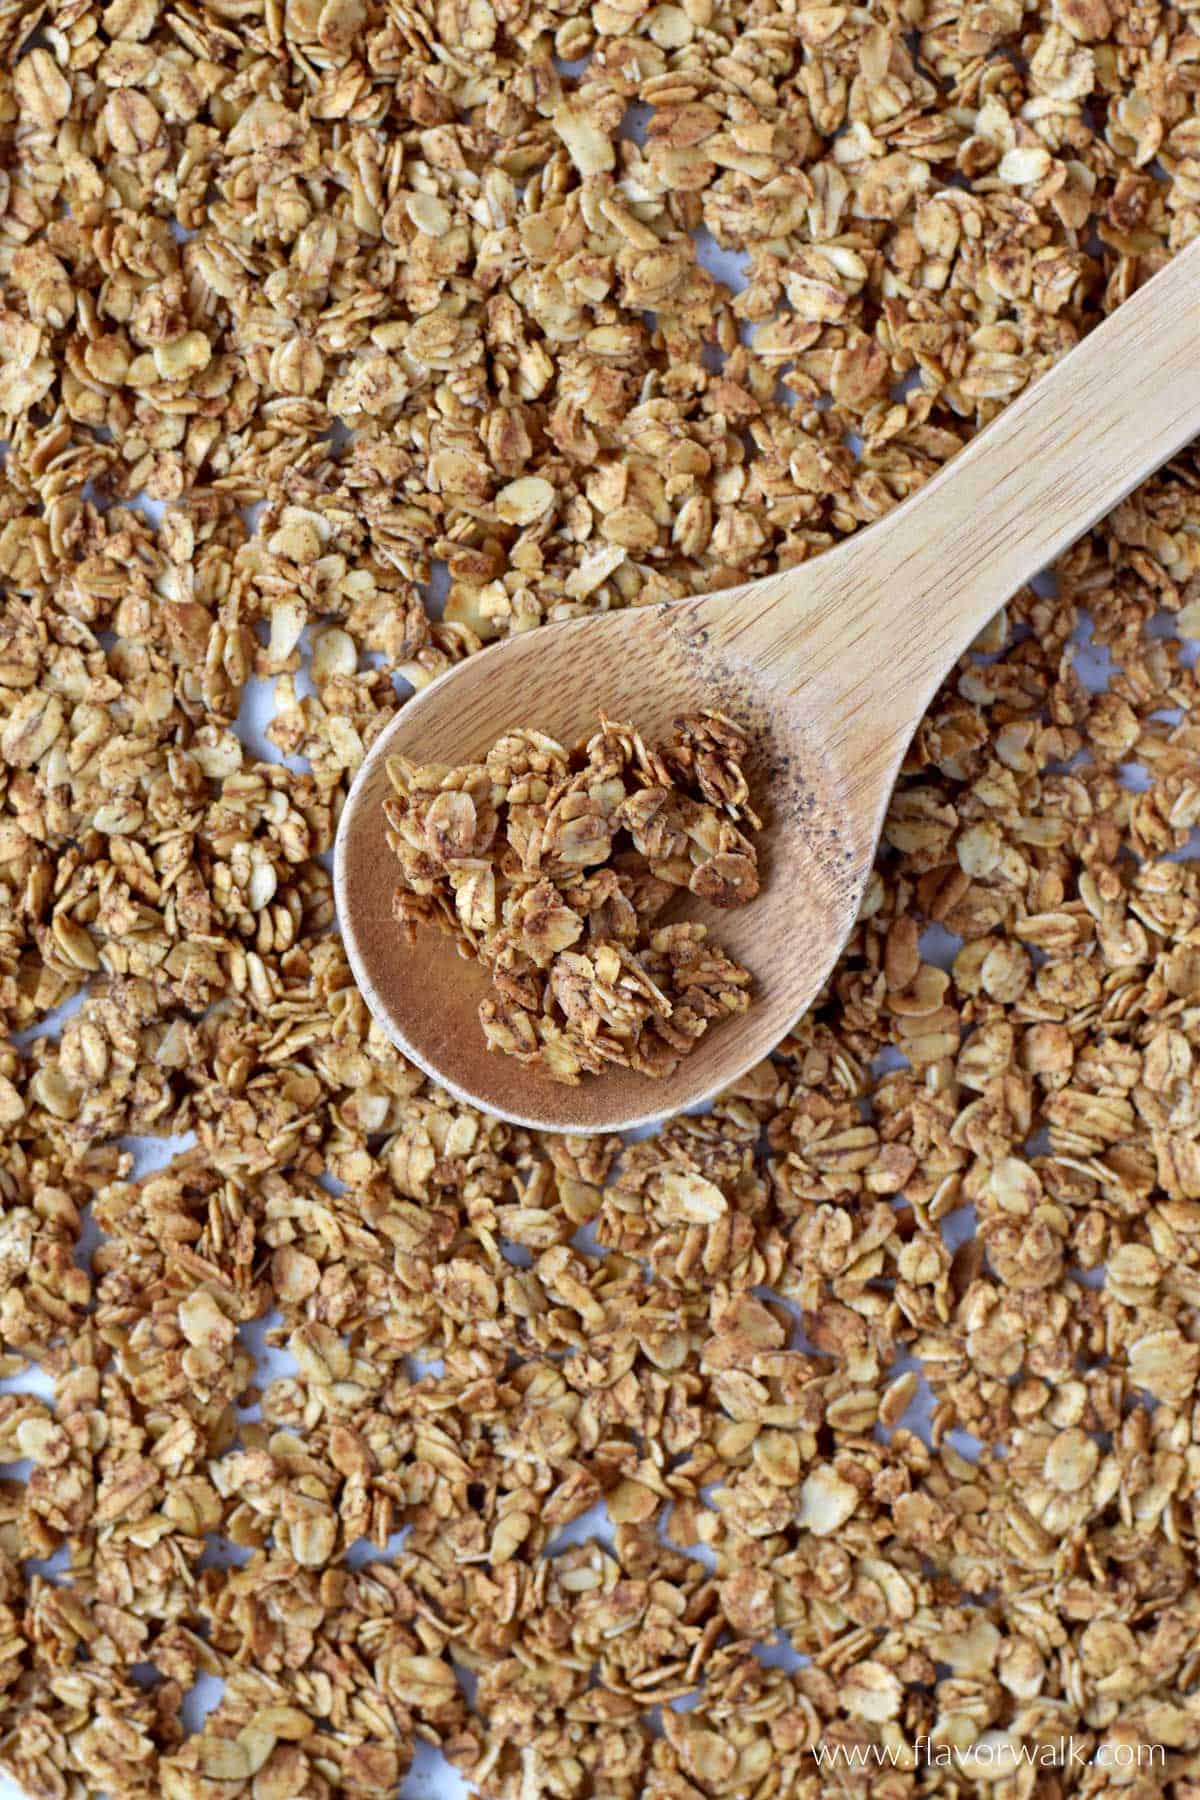 A wooden spoon with a scoop of cinnamon granola resting on a baking sheet filled with granola.